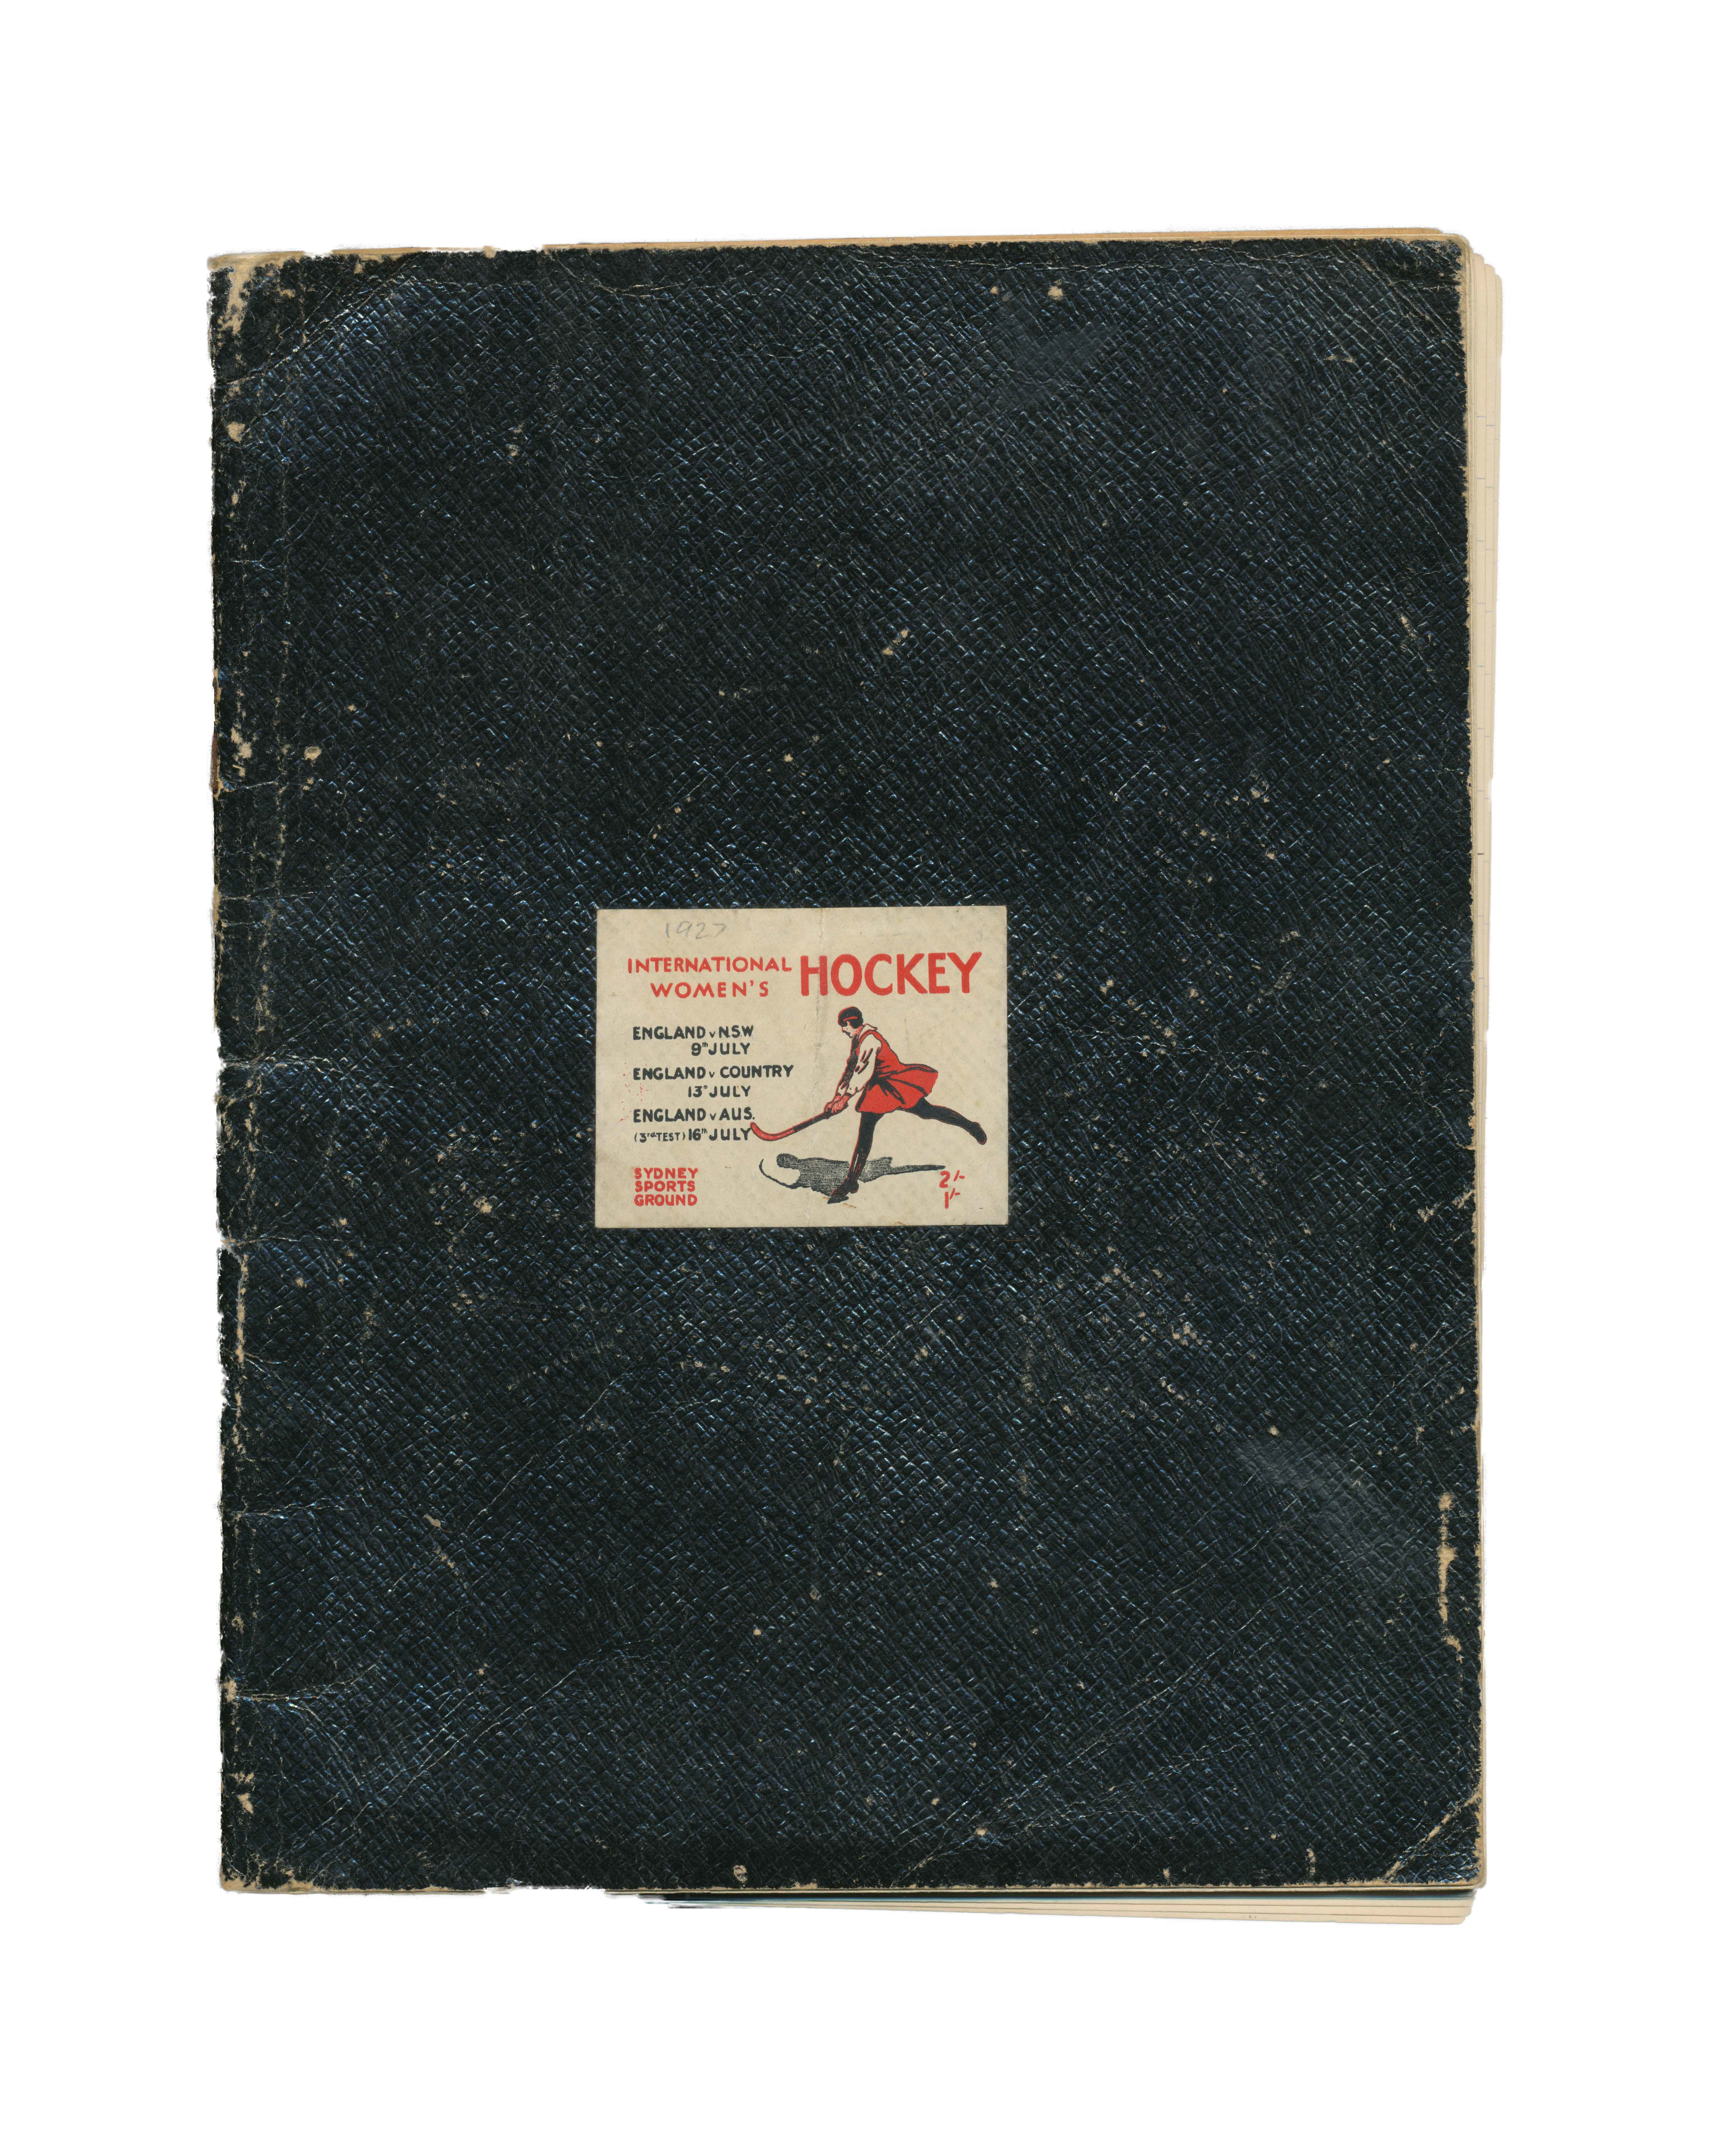 Softback notebook containing match reports by player F. I. Bryan relating to the visit of the All England Women’s Hockey Association touring team to Australia, 28 May-23 July 1927.